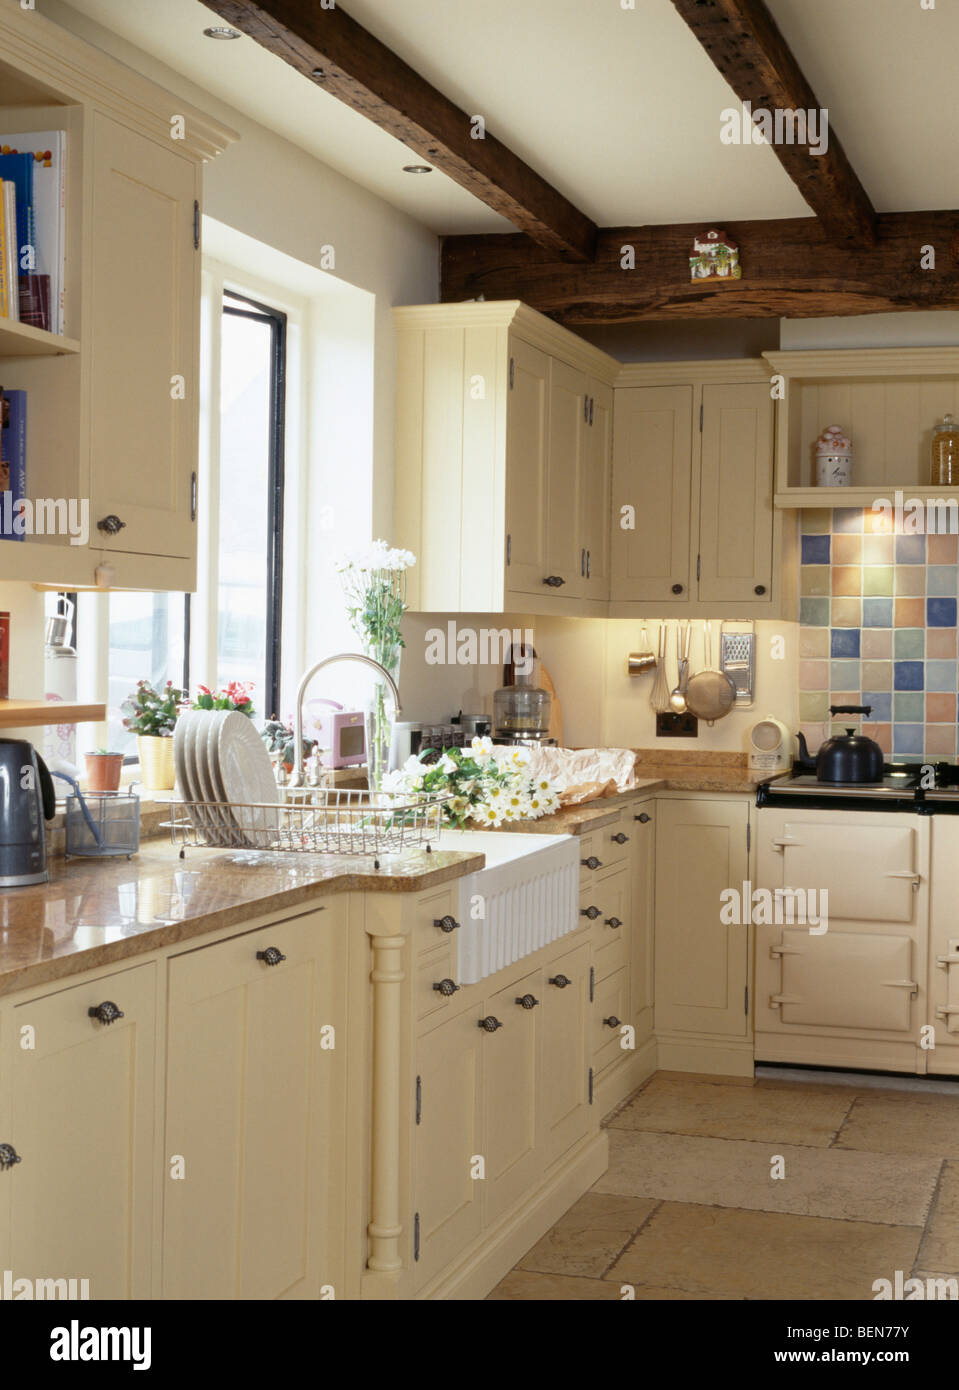 Belfast Sink Below Window In Country Cottage Kitchen With Cream Fitted Units Stock Photo Alamy